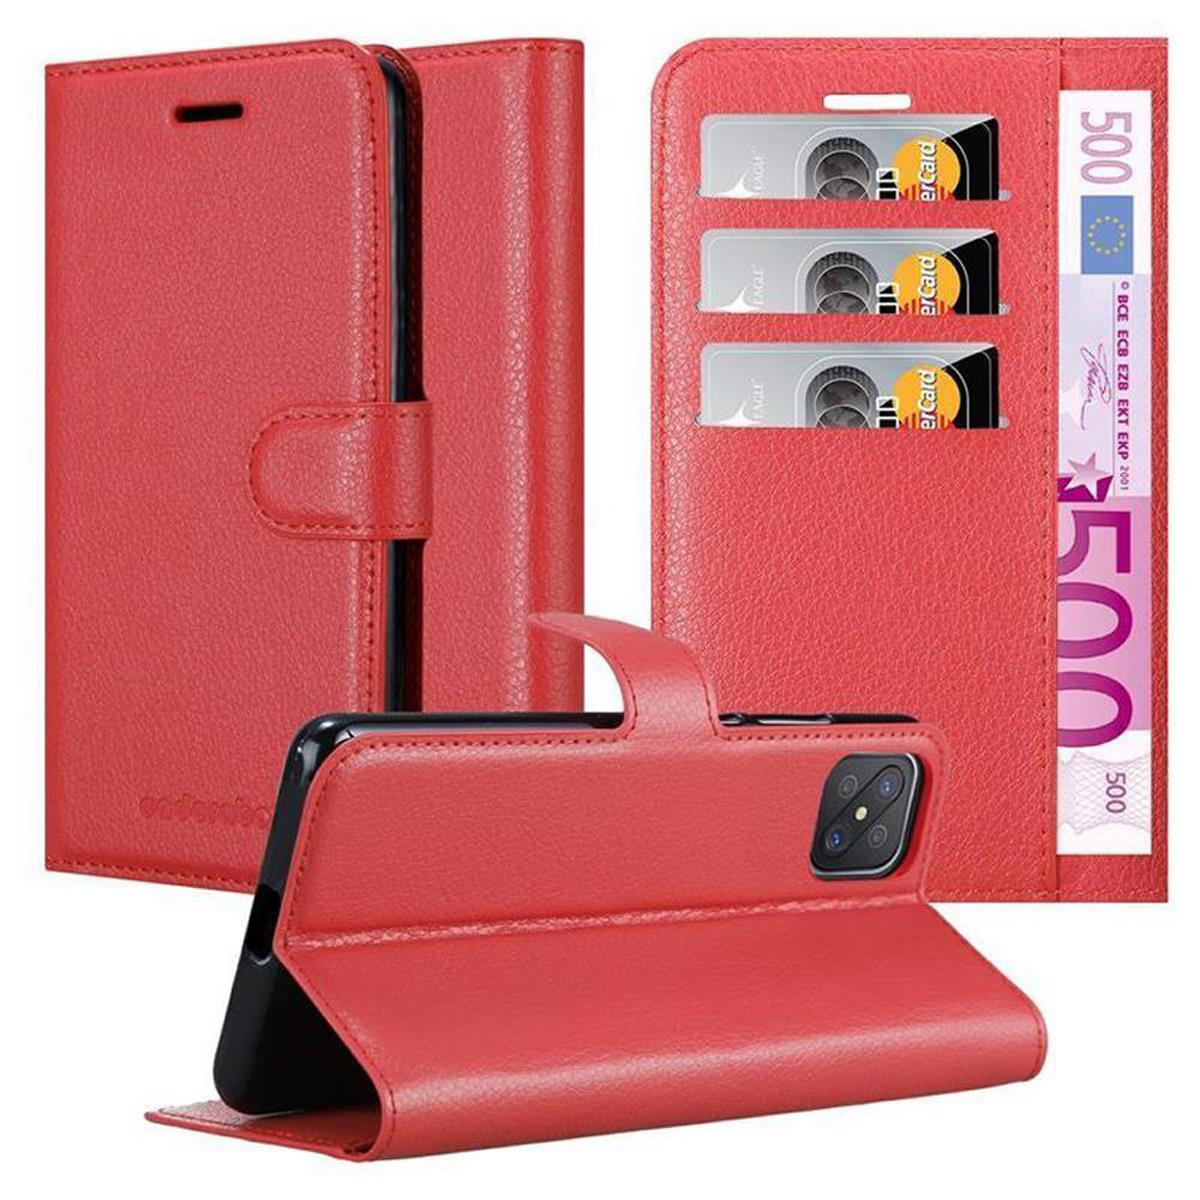 CADORABO Book Standfunktion, Oppo, ROT KARMIN Hülle Bookcover, A92s